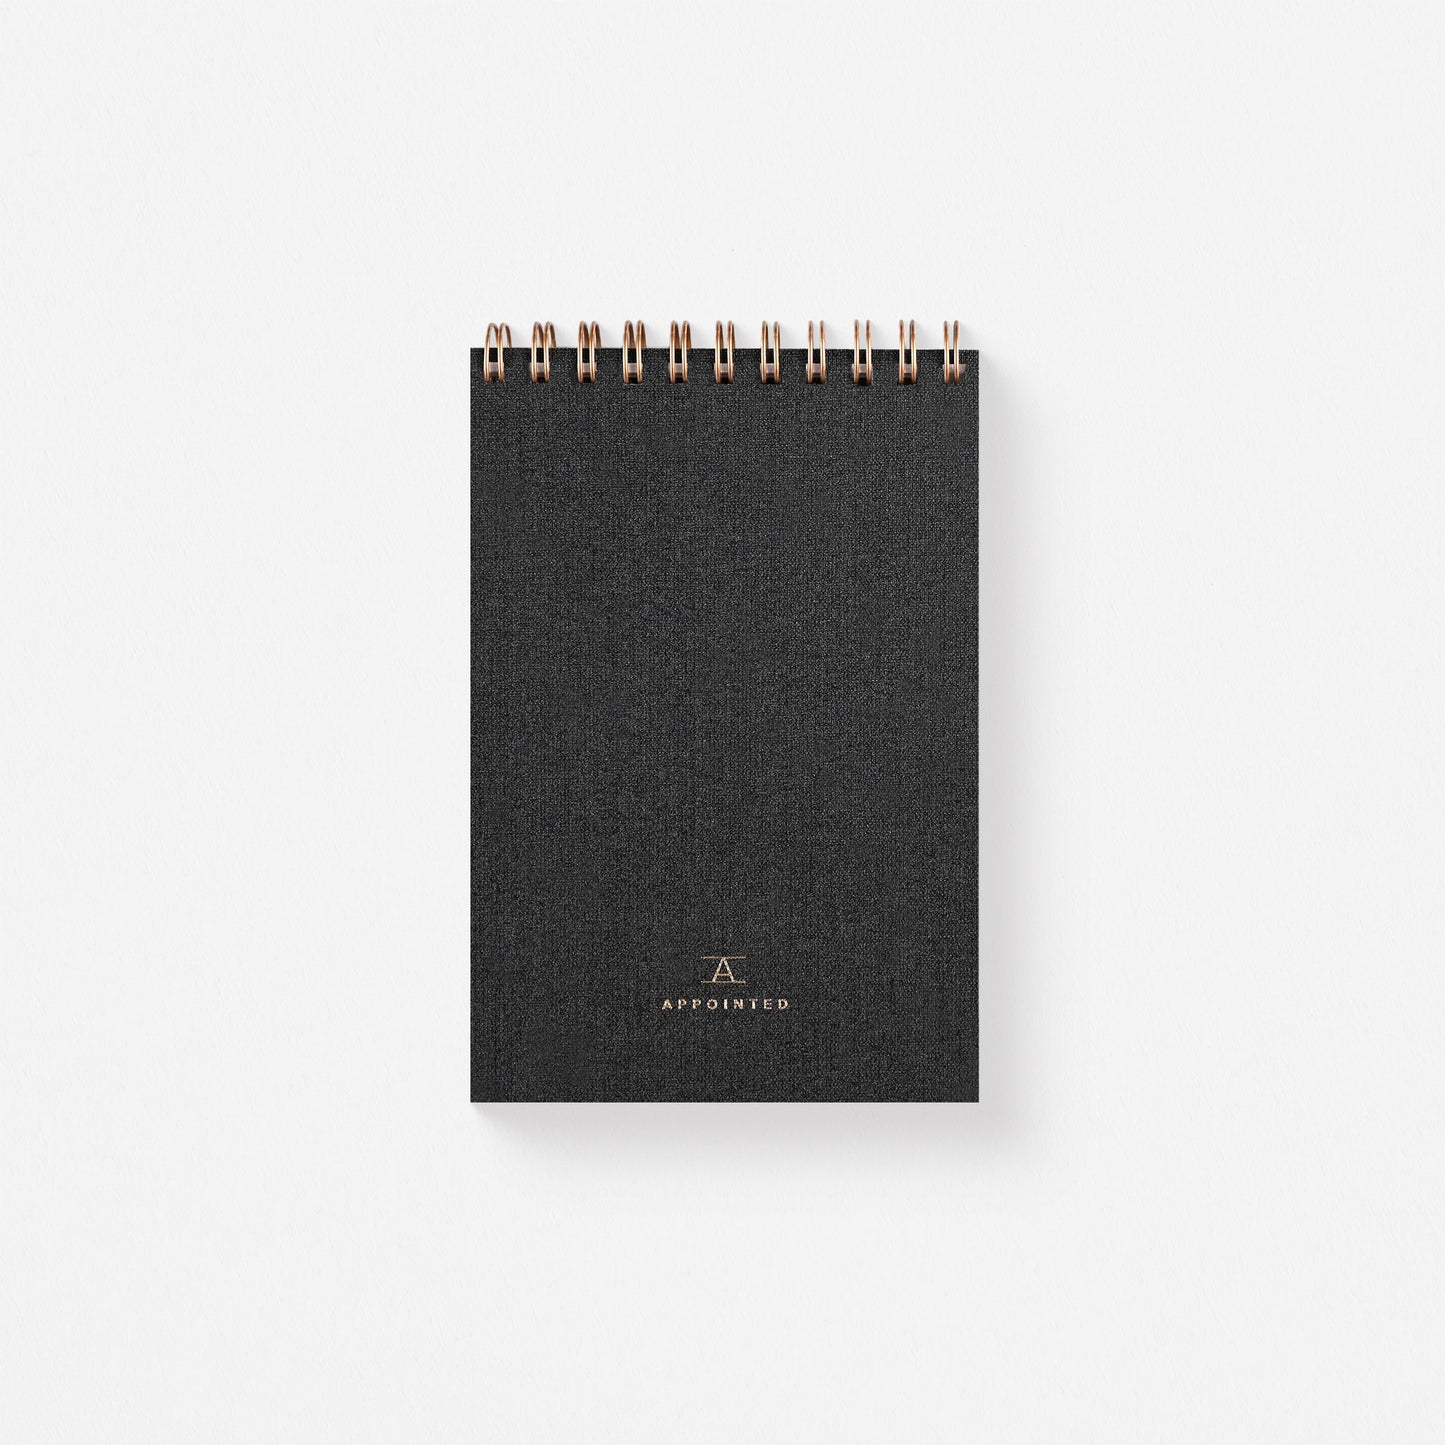 Appointed Pocket Notepad in Charcoal Gray 